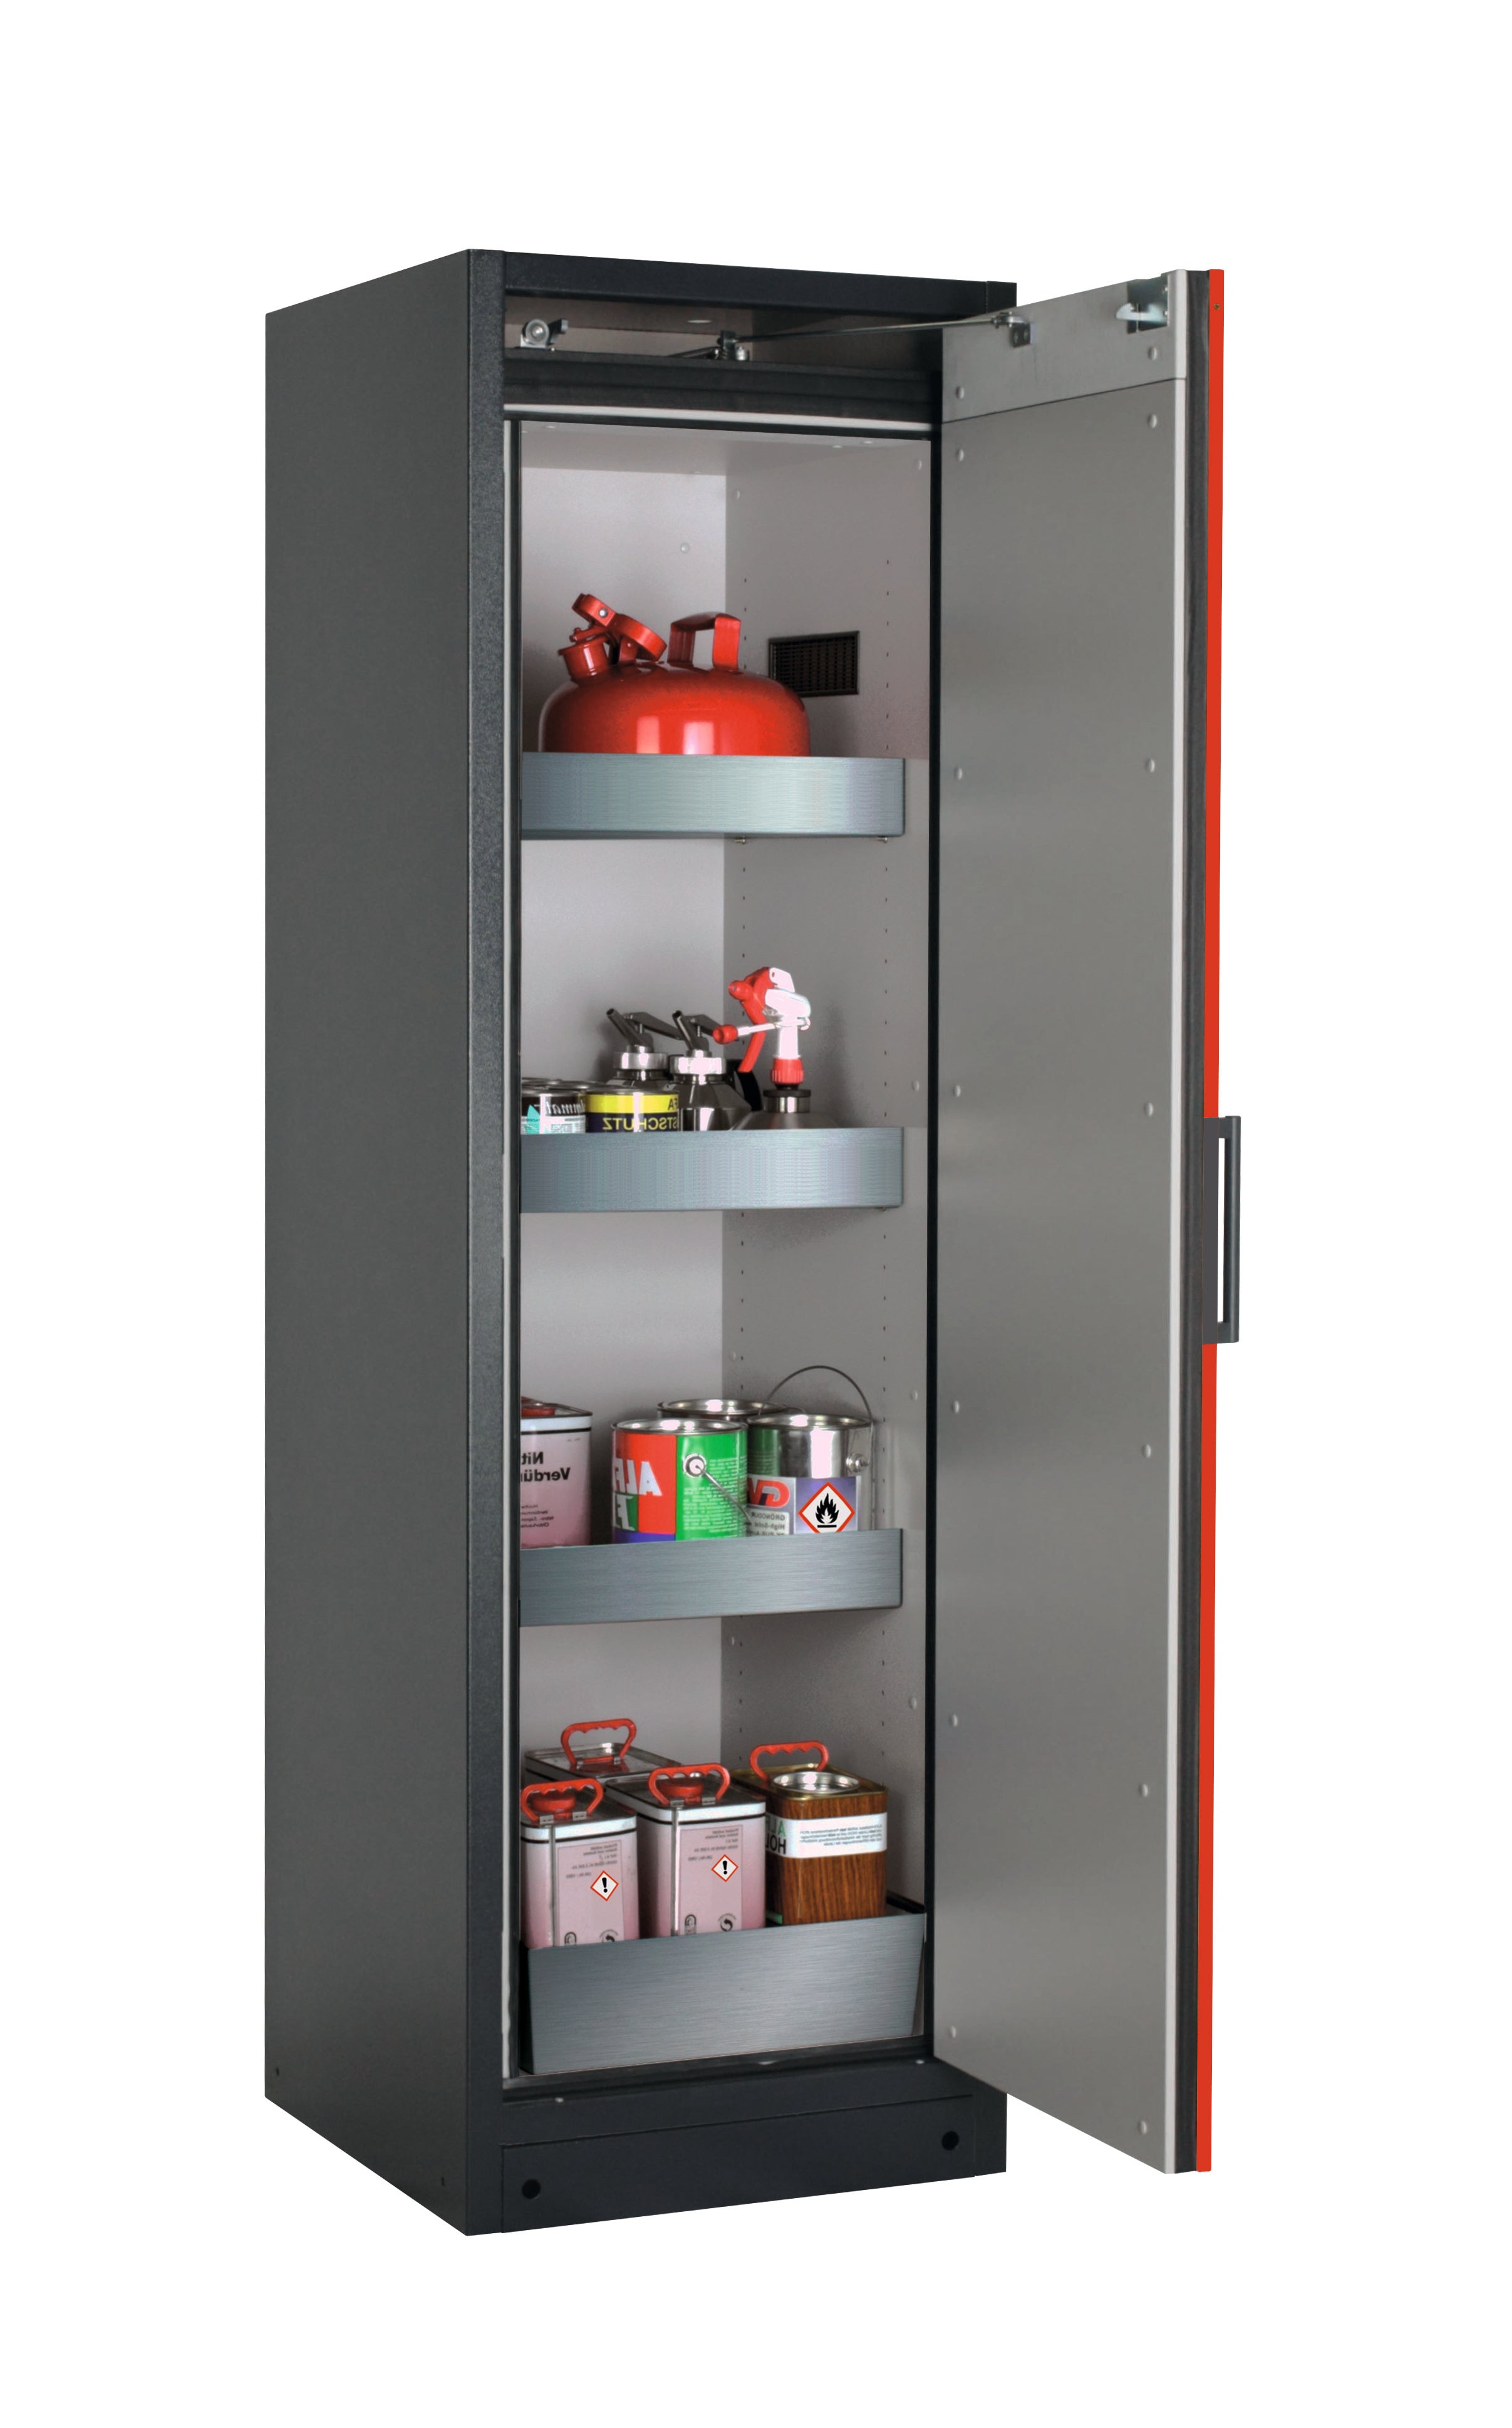 Type 90 safety storage cabinet Q-PEGASUS-90 model Q90.195.060.WDACR in traffic red RAL 3020 with 3x tray shelf (standard) (stainless steel 1.4301),